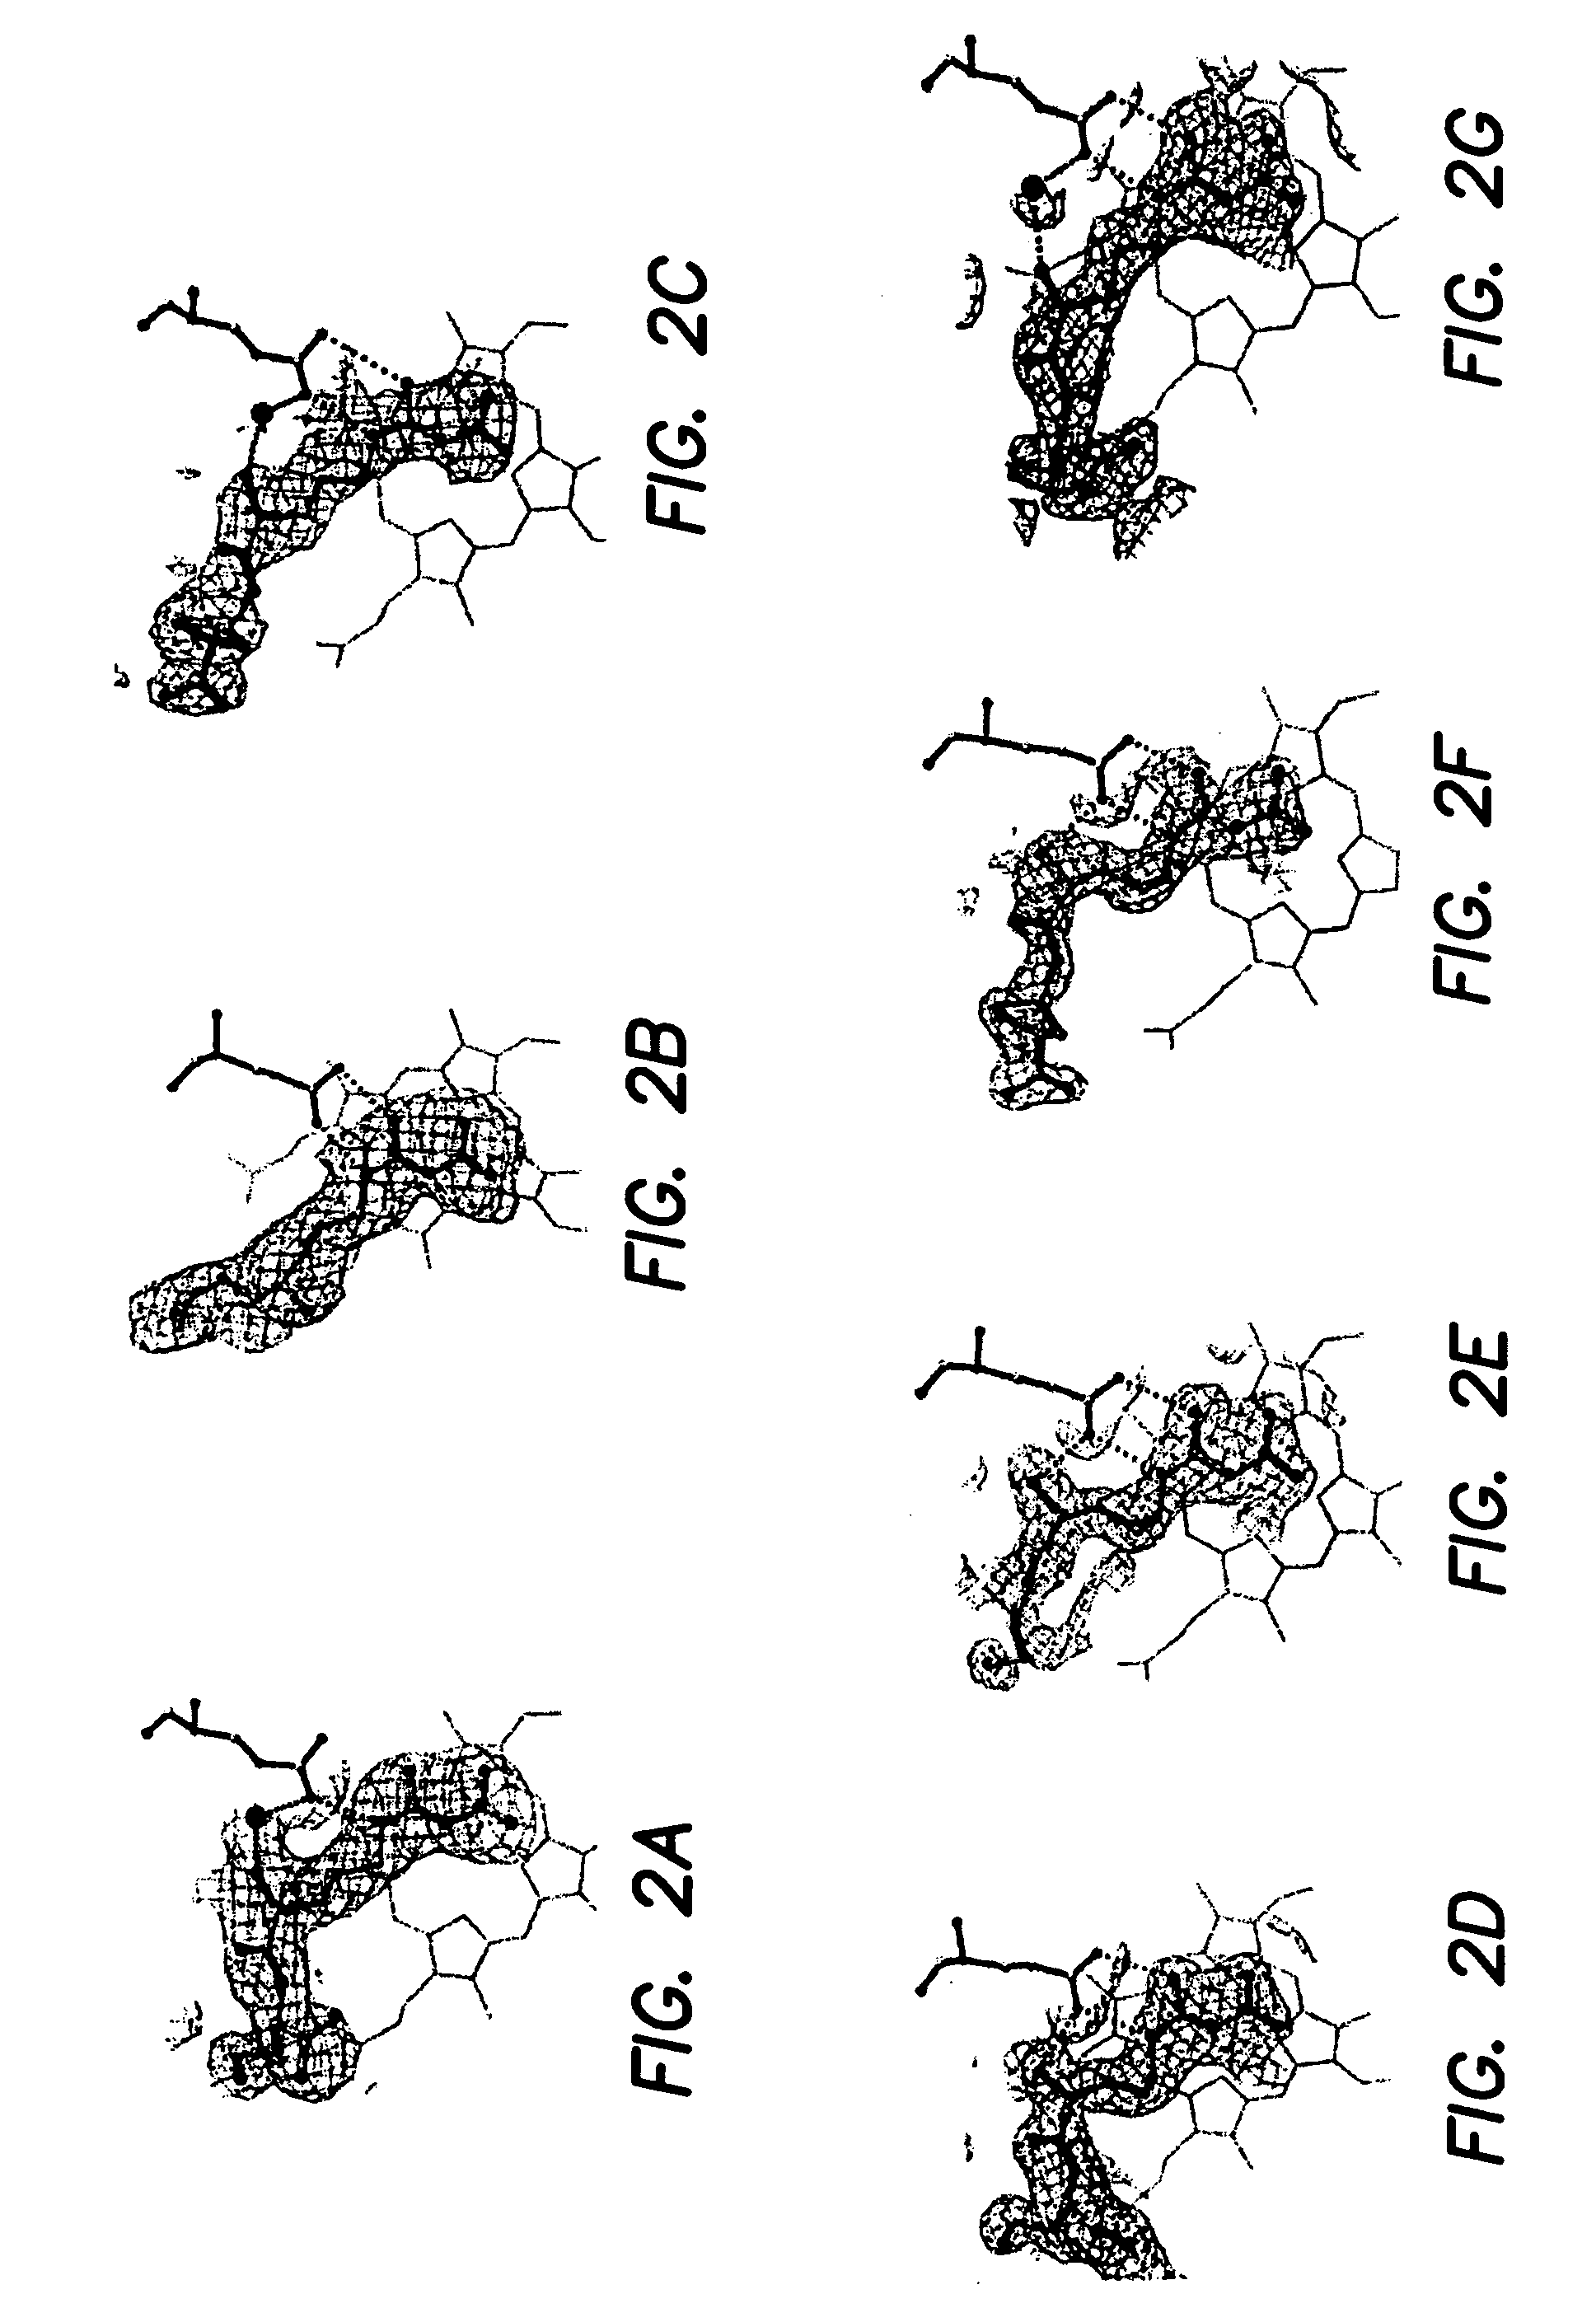 Selective inhibition of neuronal nitric oxide synthase